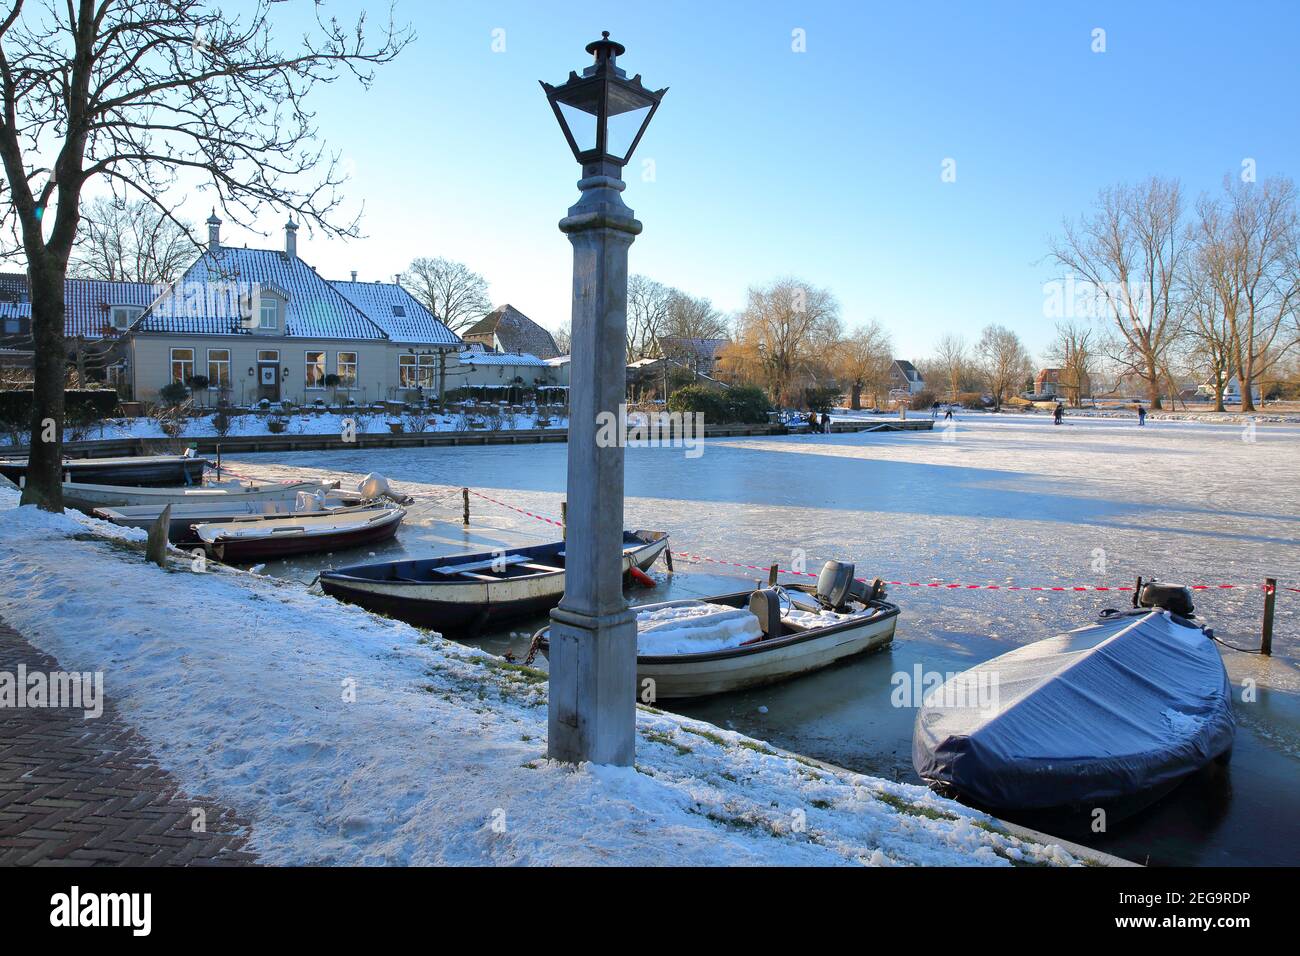 Winter snow and people ice skating on frozen water in Broek in Waterland, a  small town with traditional old and painted wooden houses, North Holland  Stock Photo - Alamy